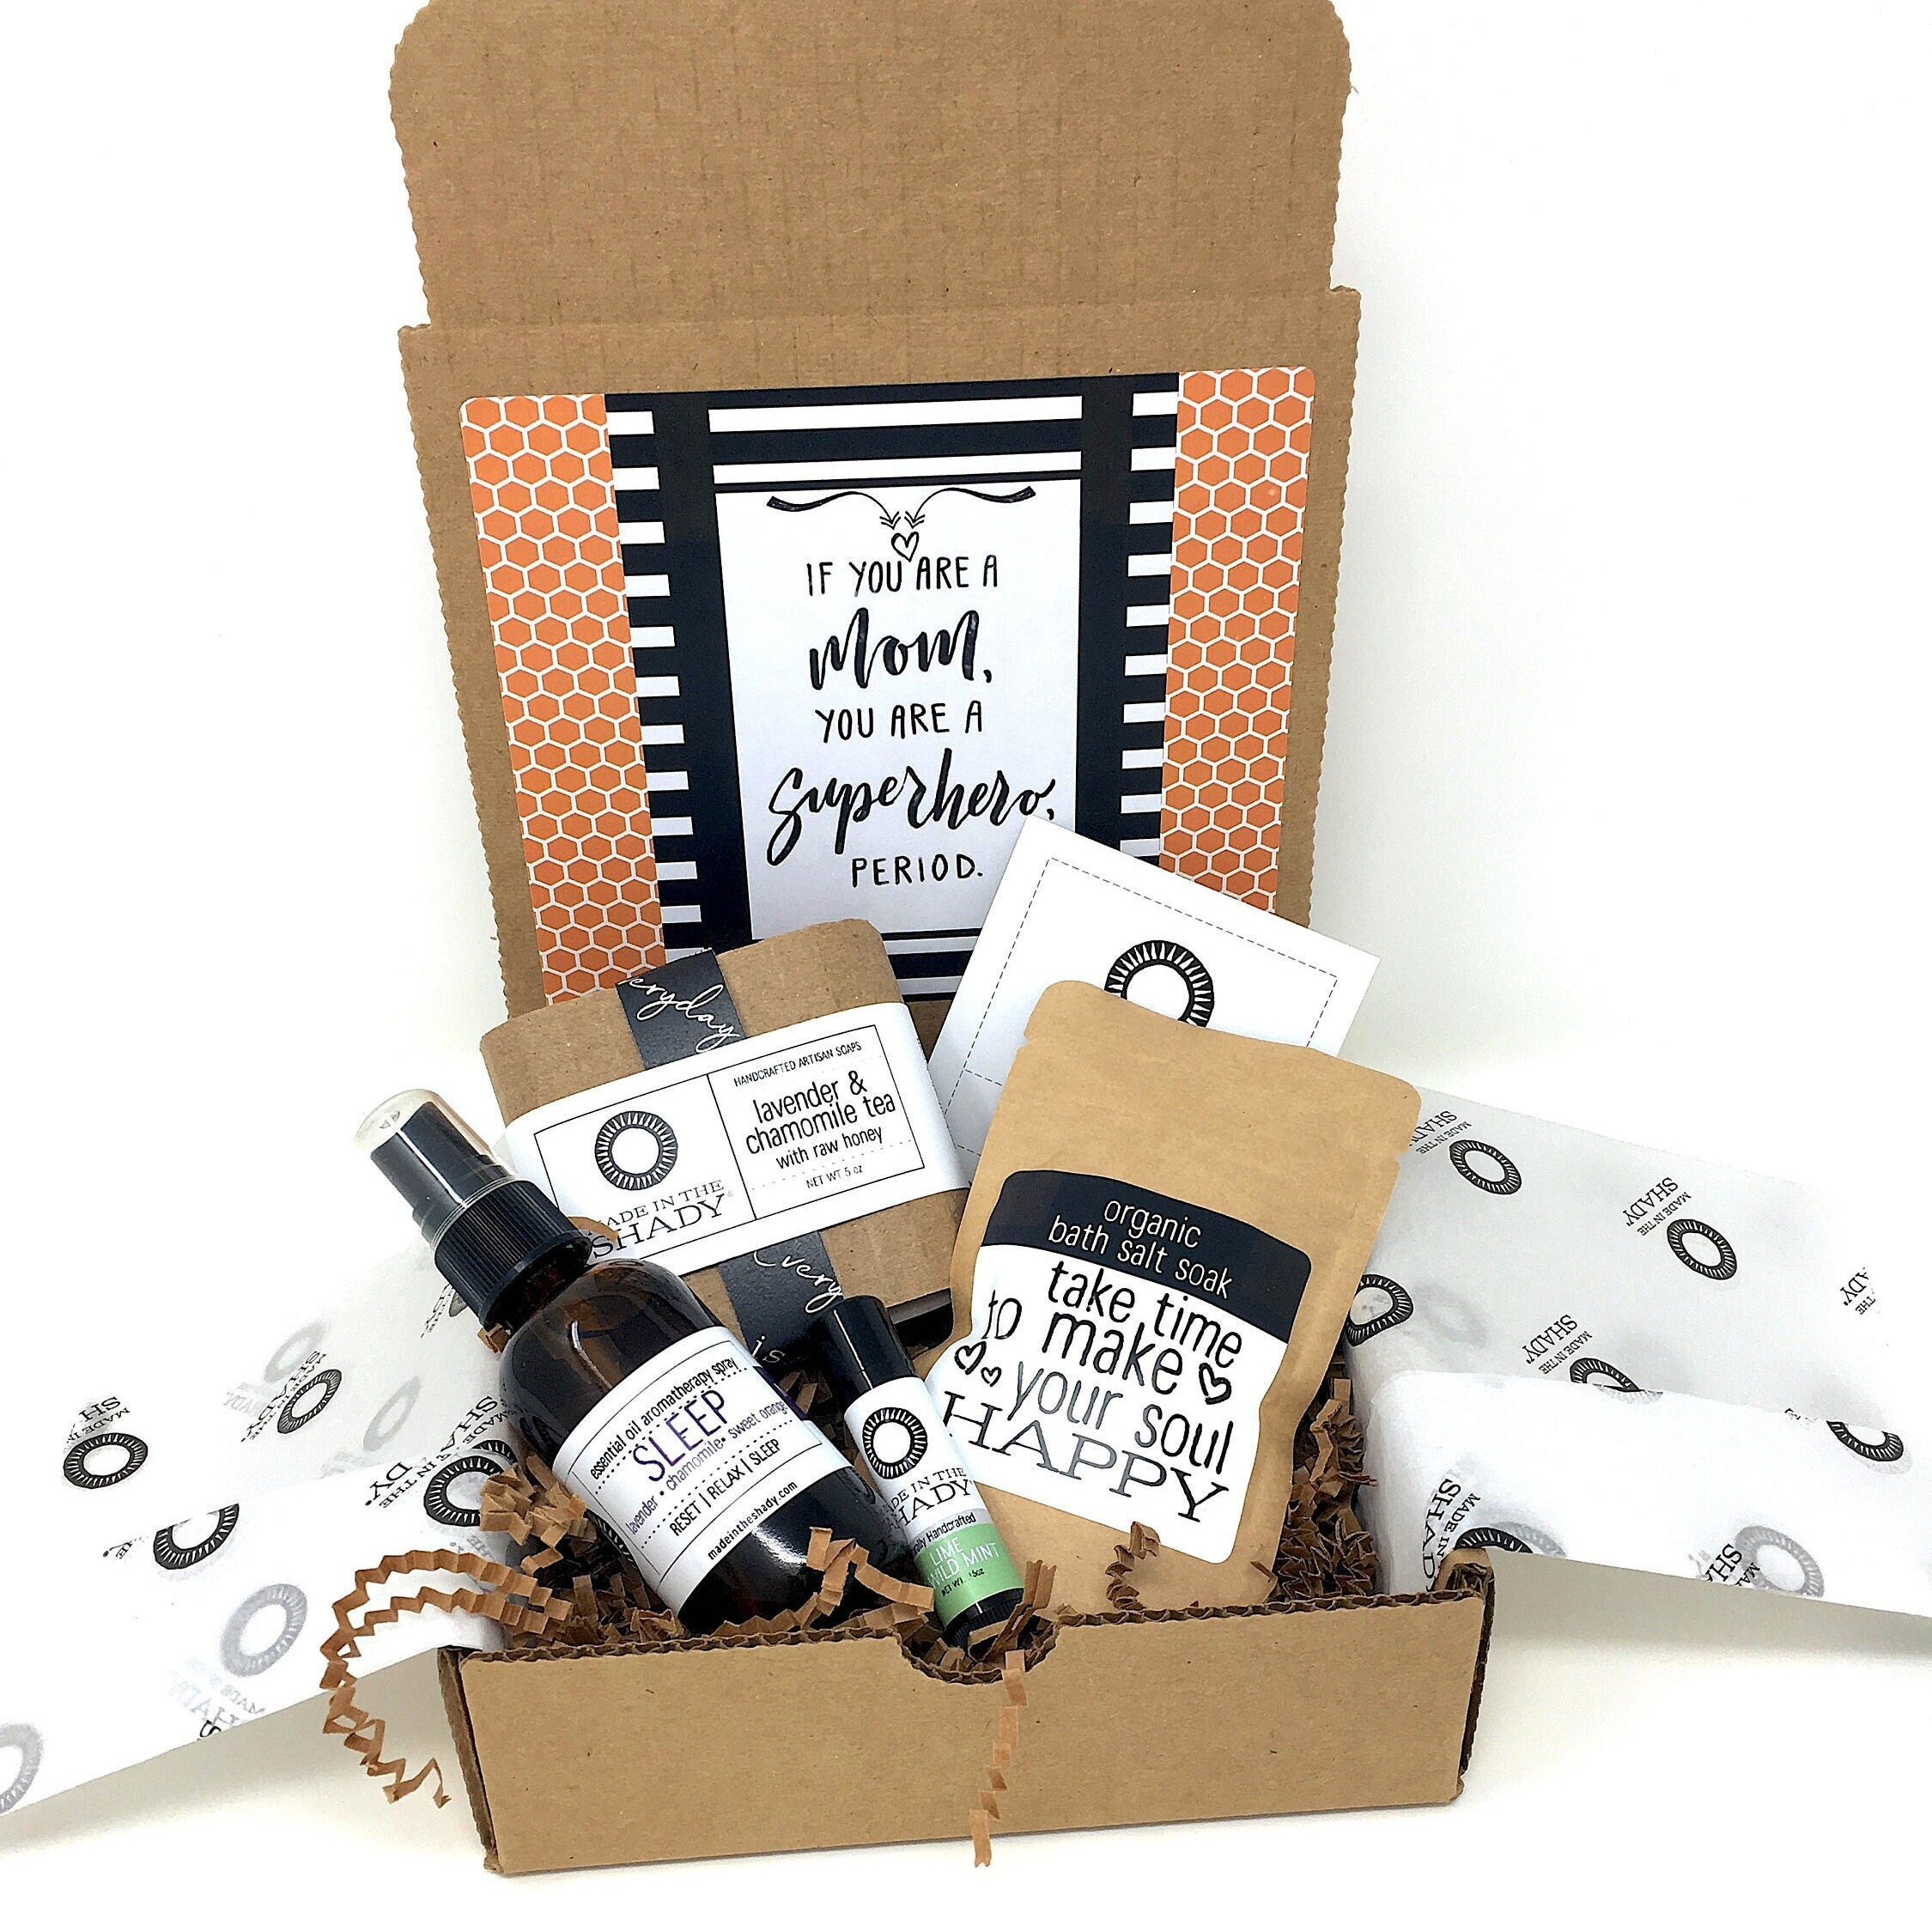 New Mom Gift Baskets 2022 - Ready-to-Send or DIY Postpartum Gifts